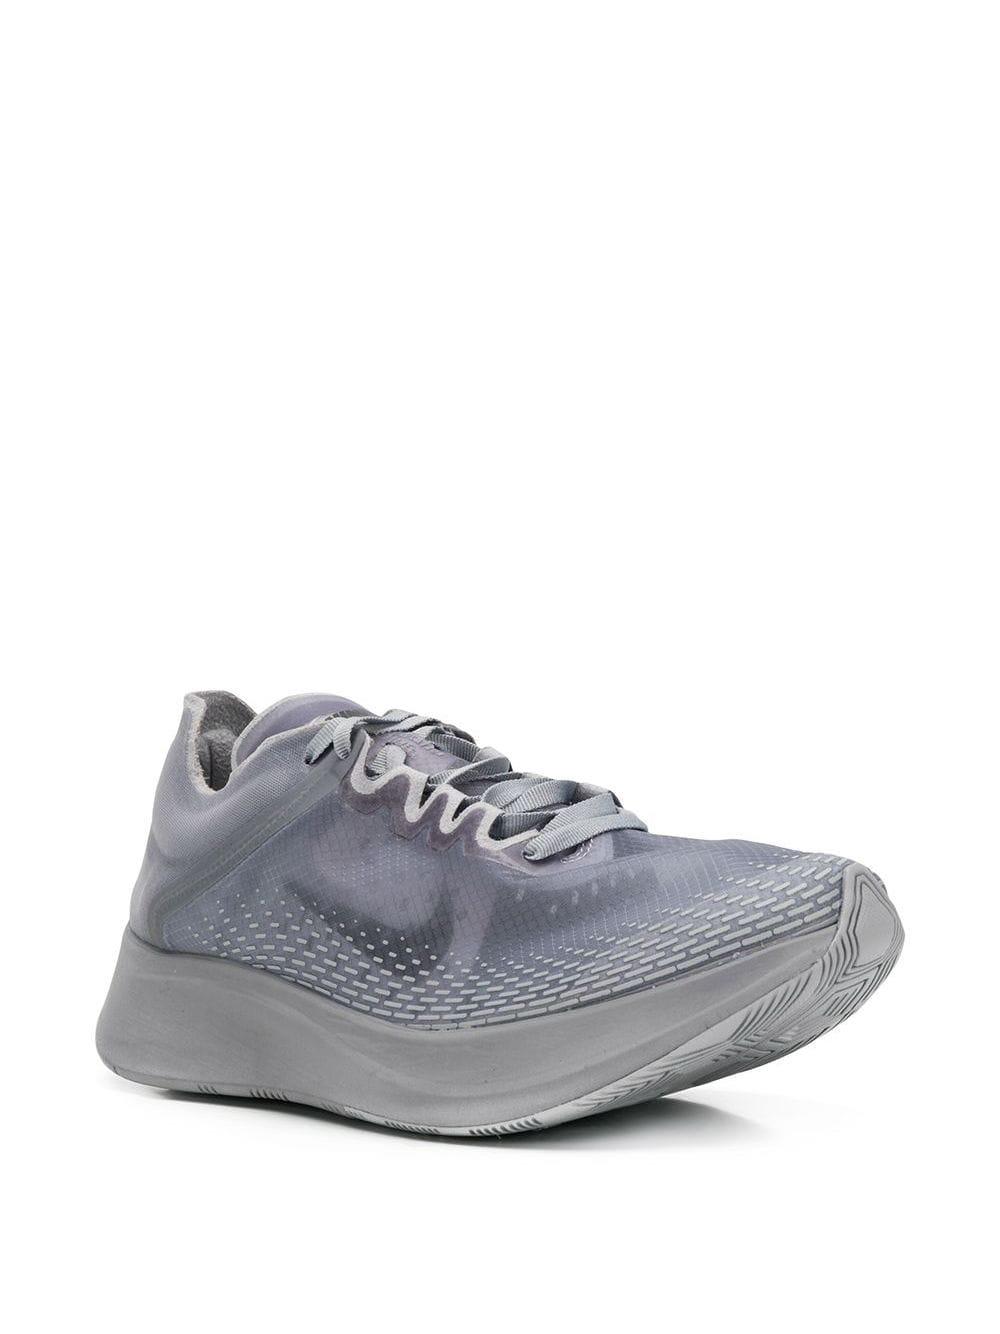 Nike Zoom Fly Sp Fast Sneakers in Grey (Gray) for Men - Lyst